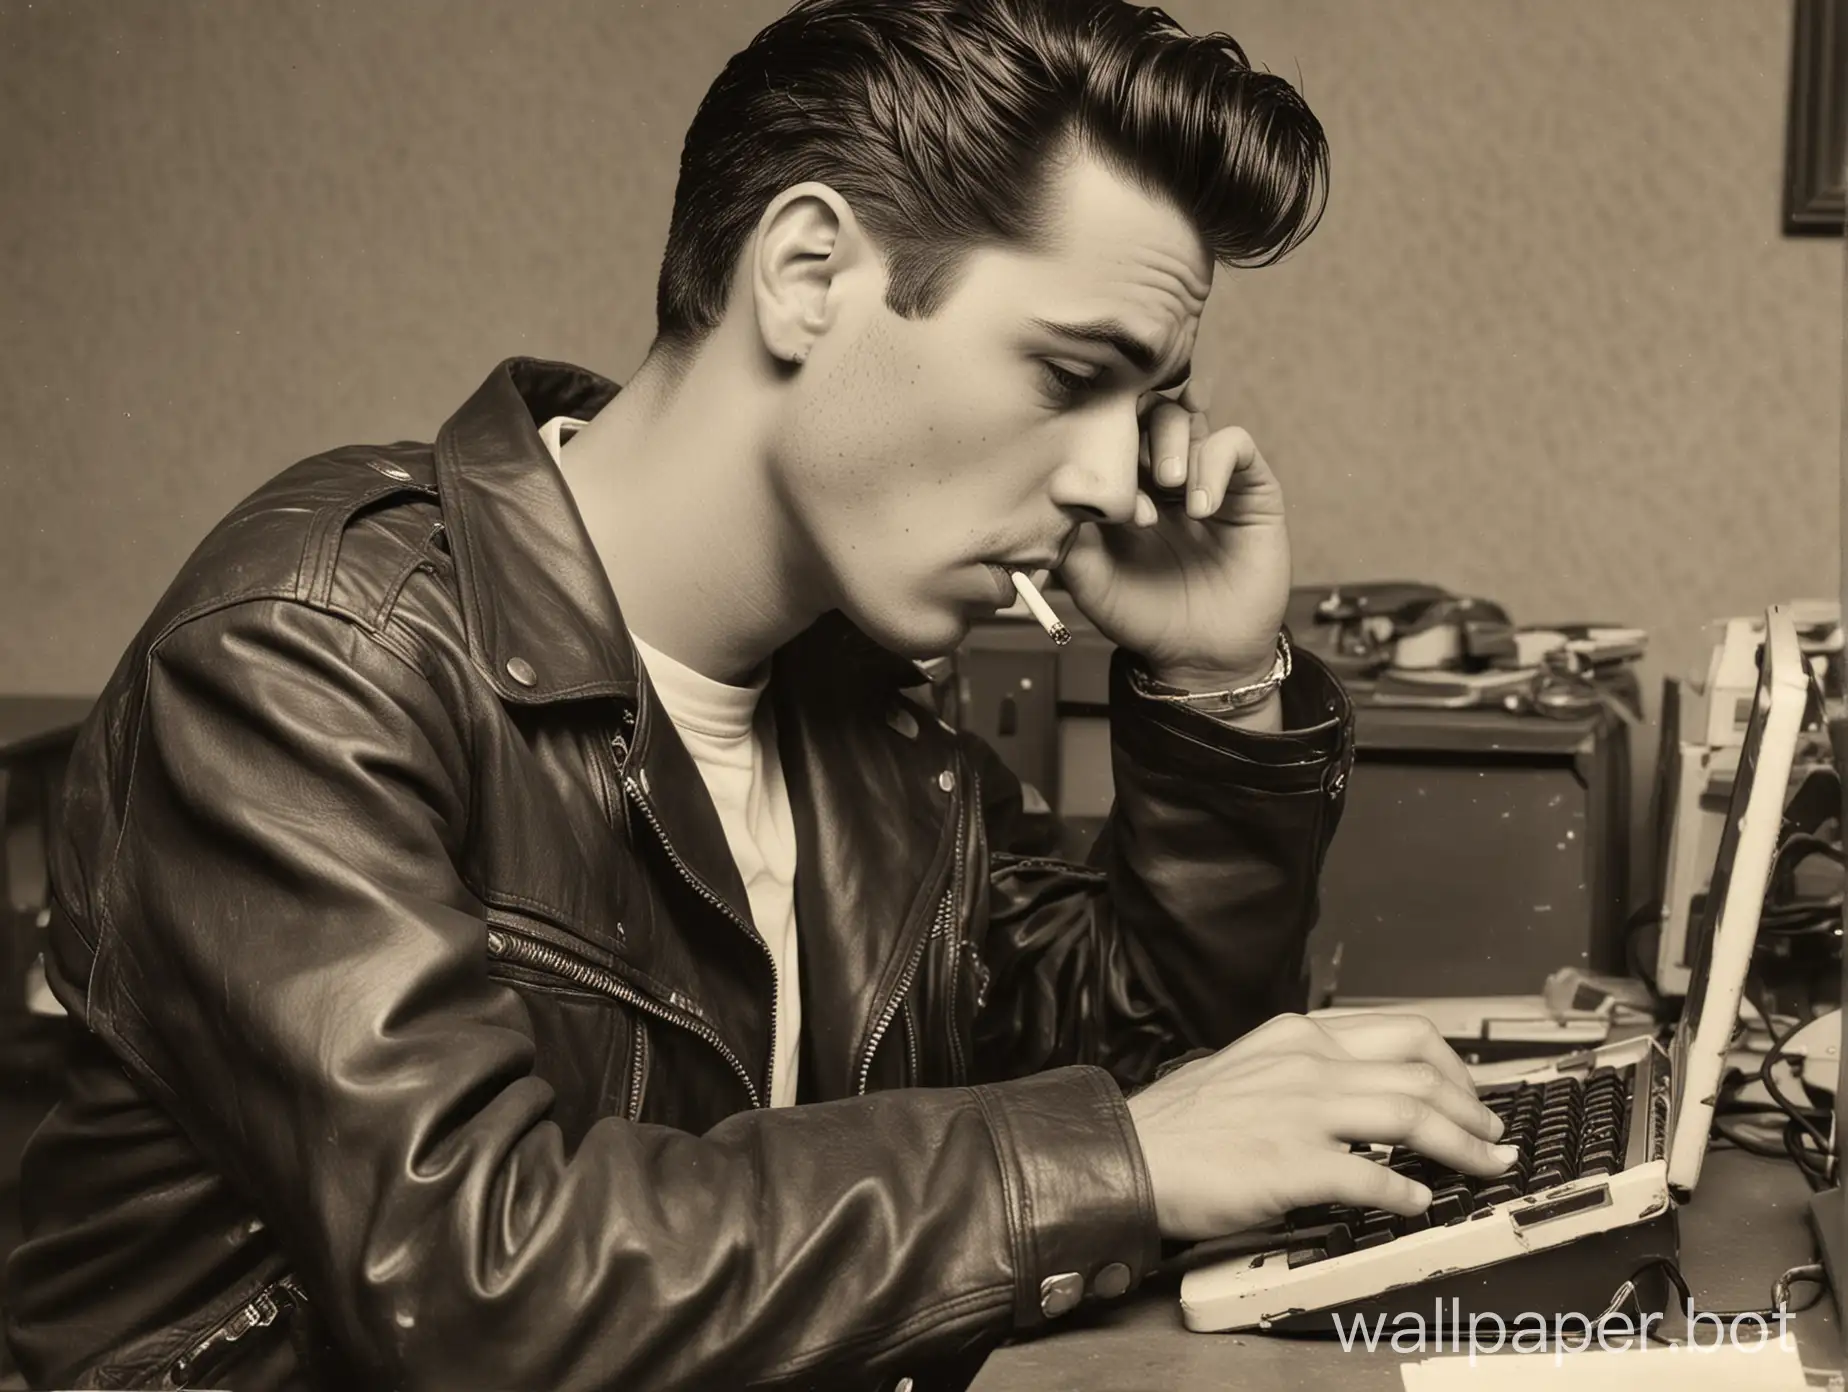 1950s greaser typing at a computer and with cigarette hanging from his mouth. He's wearing a leather jacket and blue jeans.